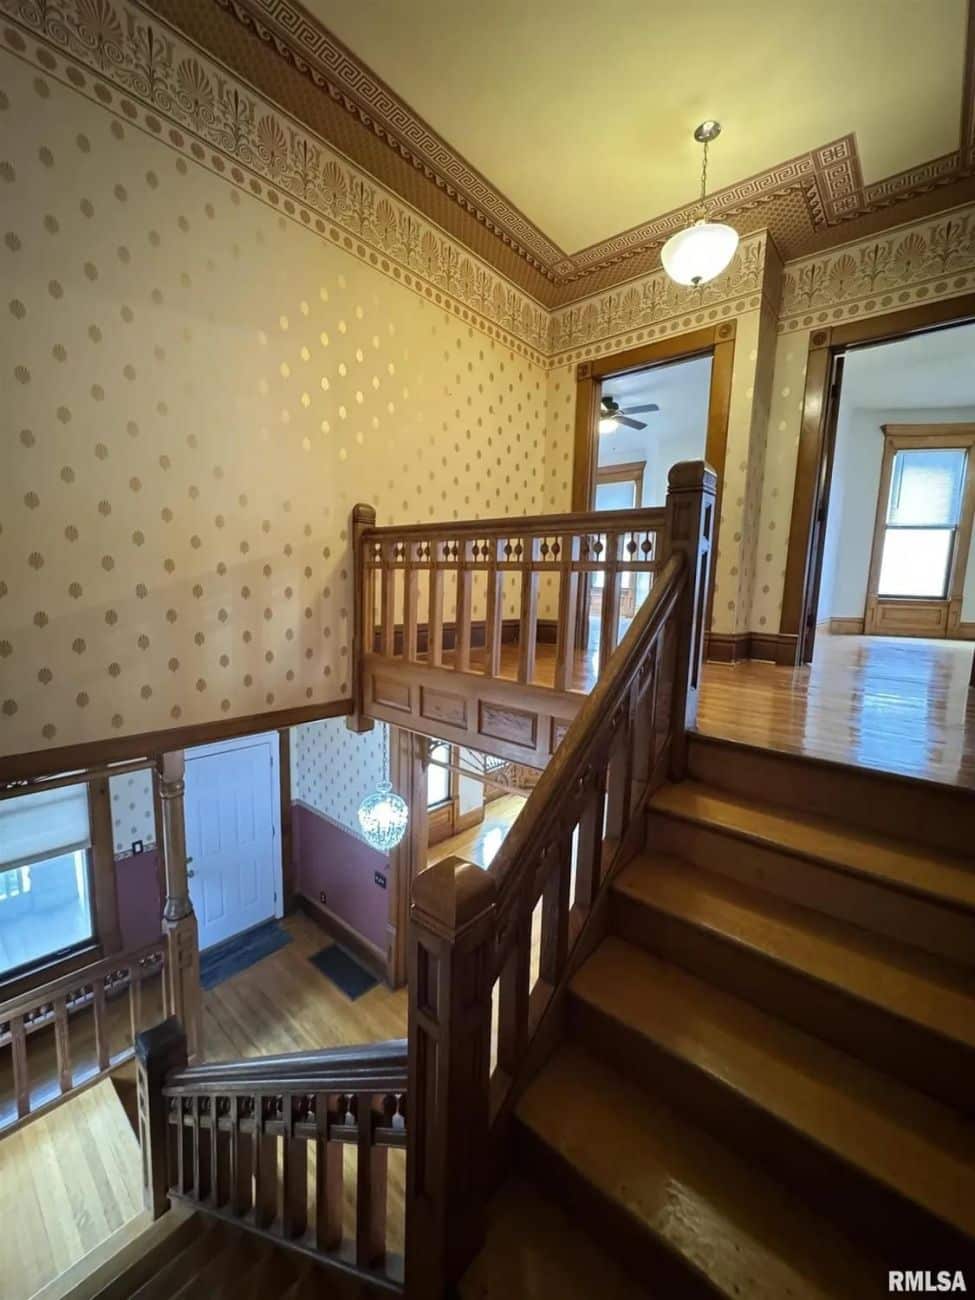 1894 Victorian For Sale In Galesburg Illinois